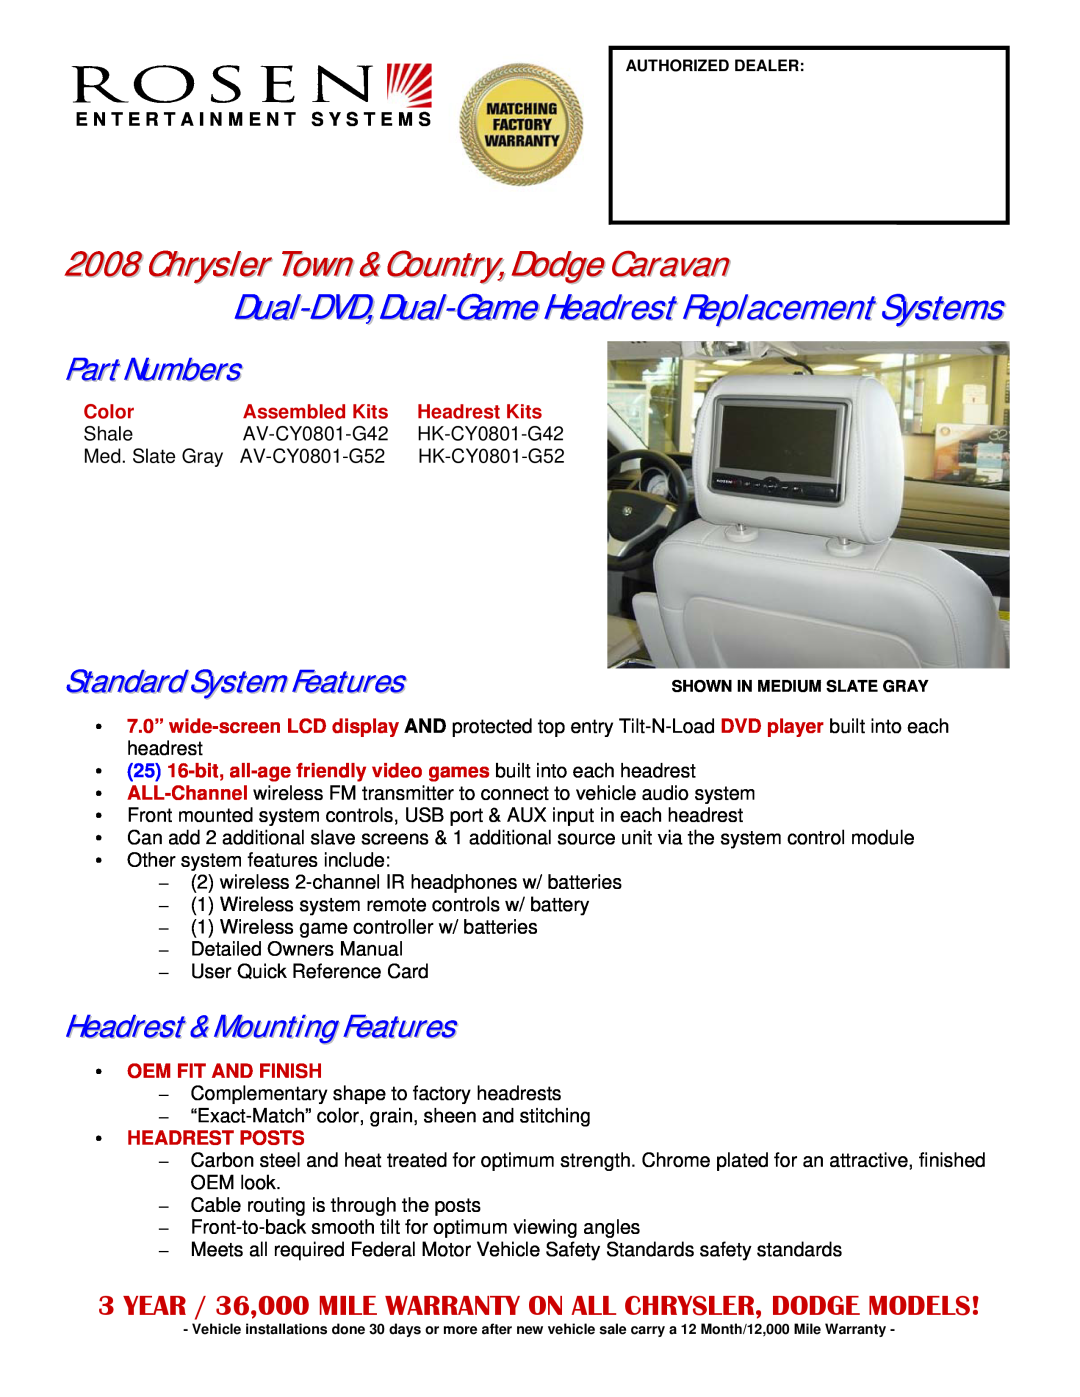 Rosen Entertainment Systems HK-CY0801-G52 owner manual Chrysler Town & Country,Dodge Caravan, PartNumbers, Color, Shale 